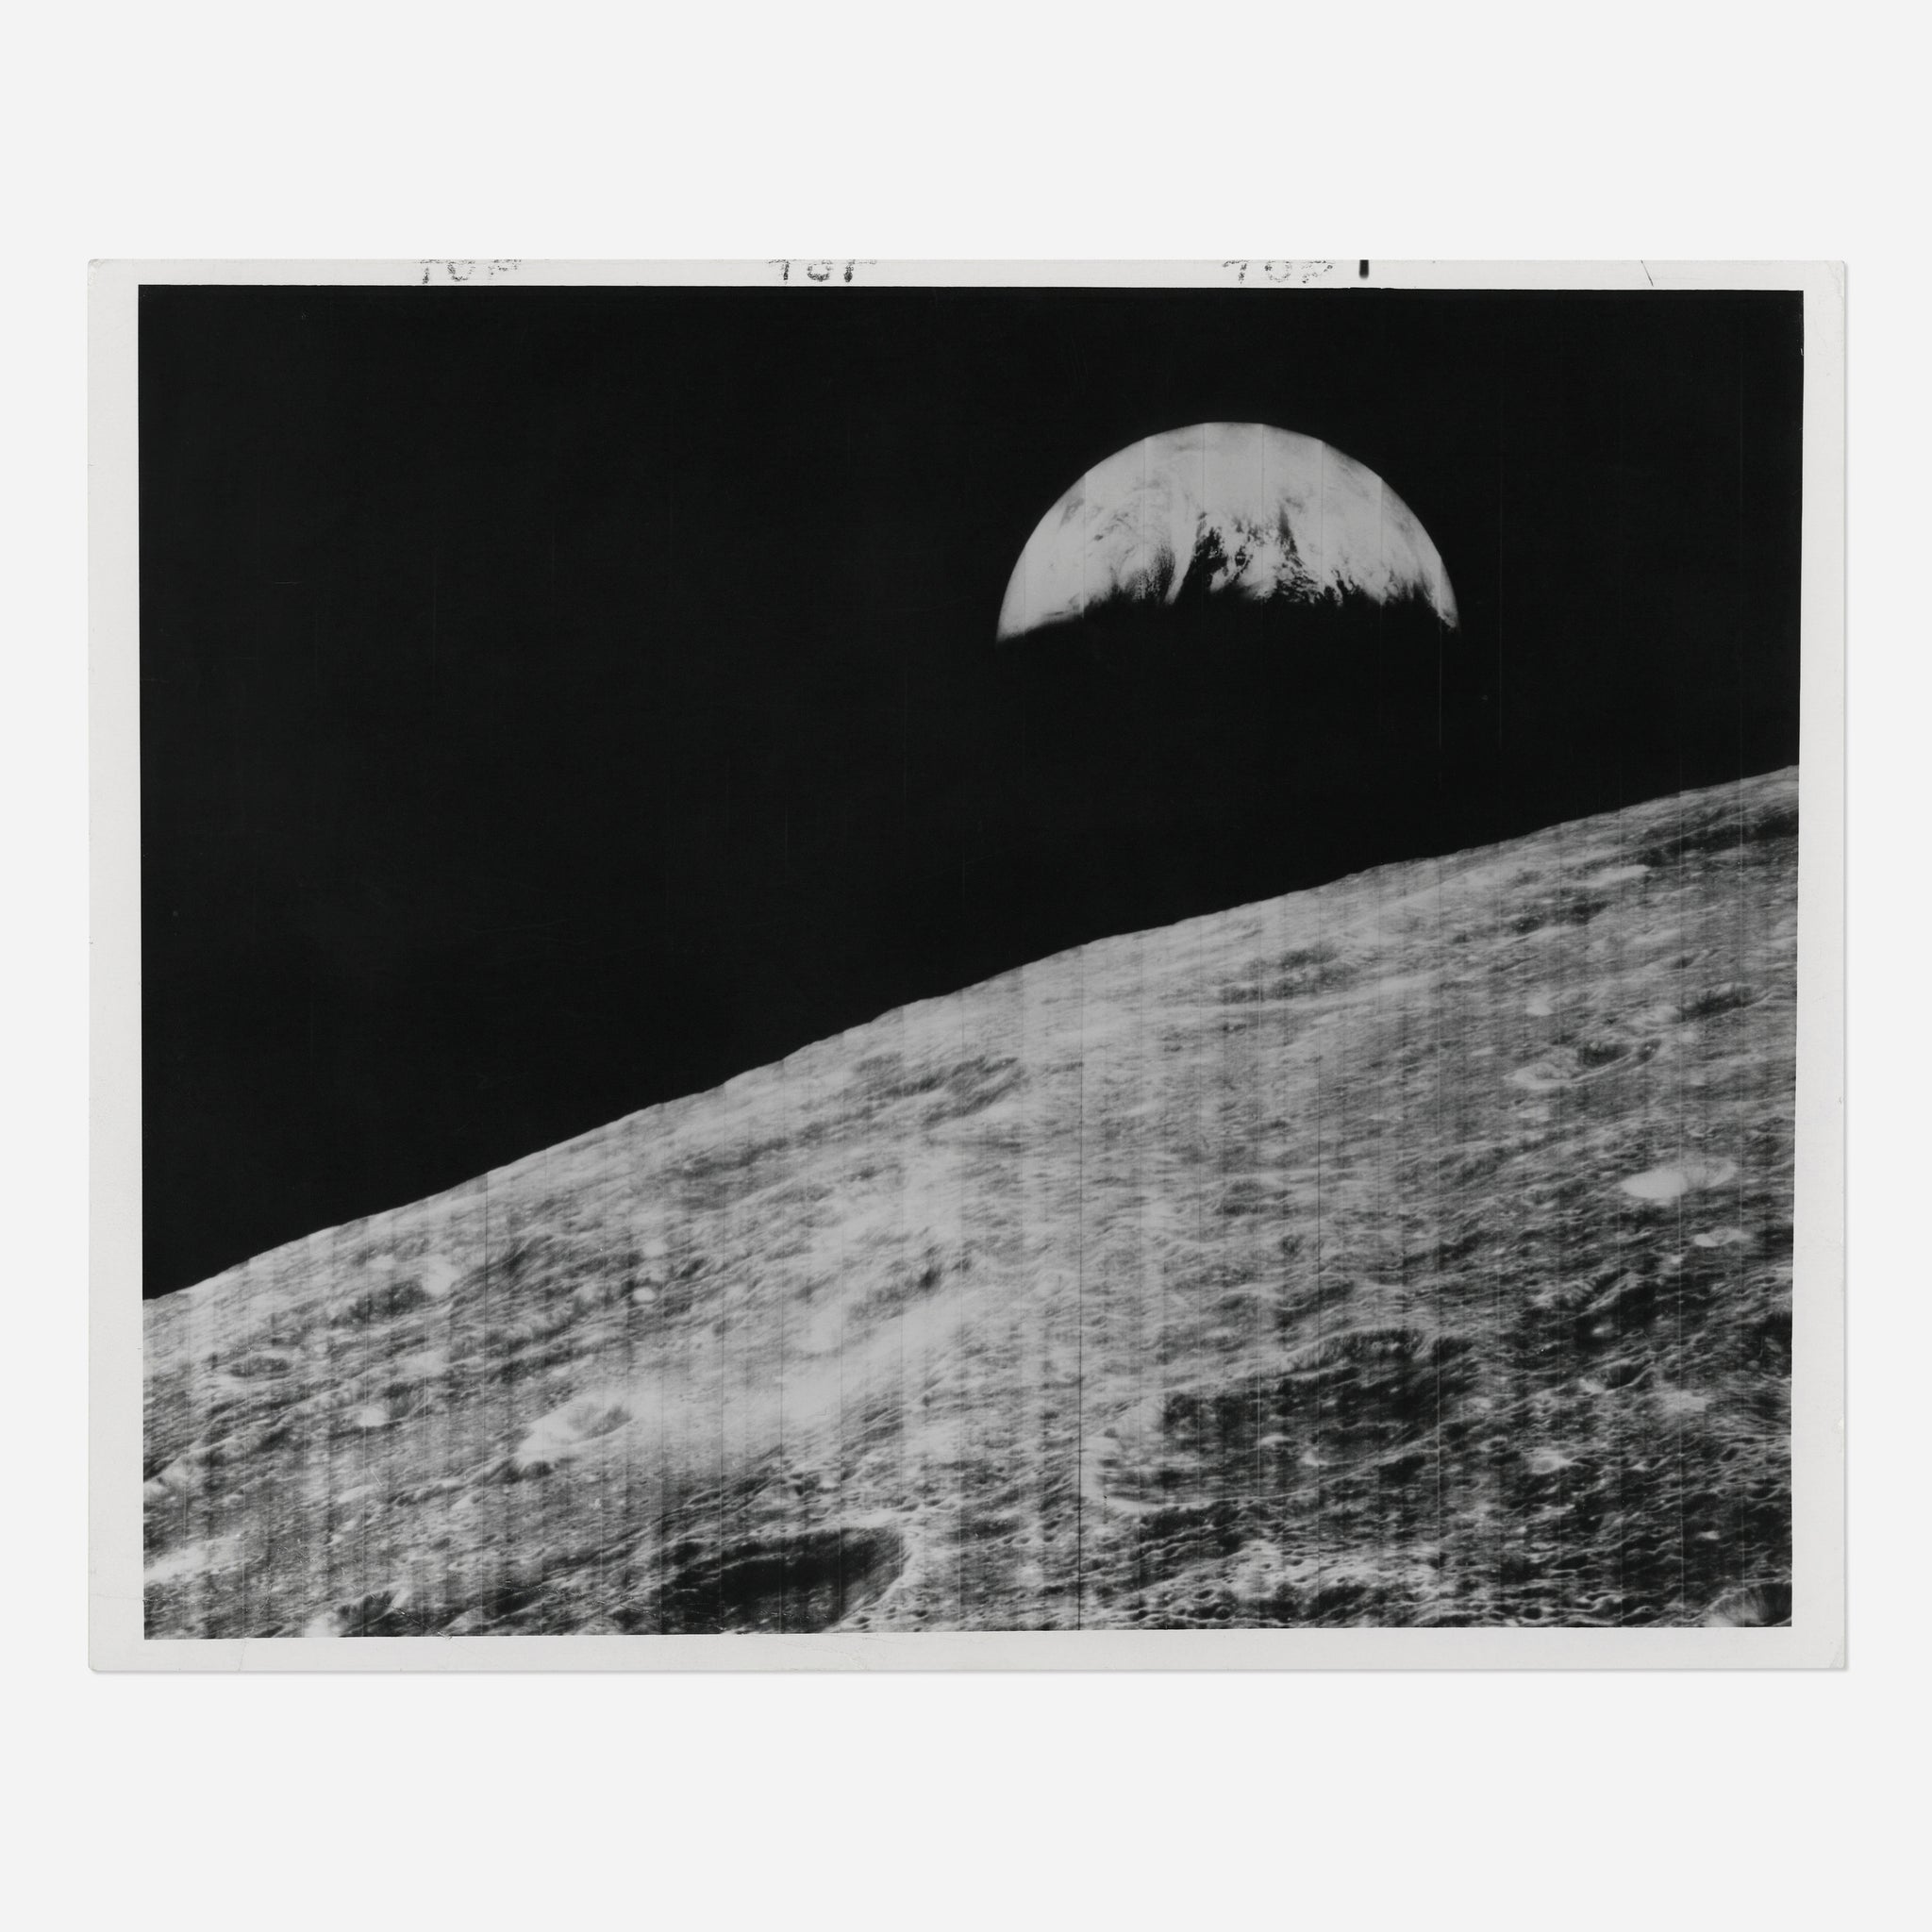 The first Earthrise in the history of humankind. 23 August 1966.